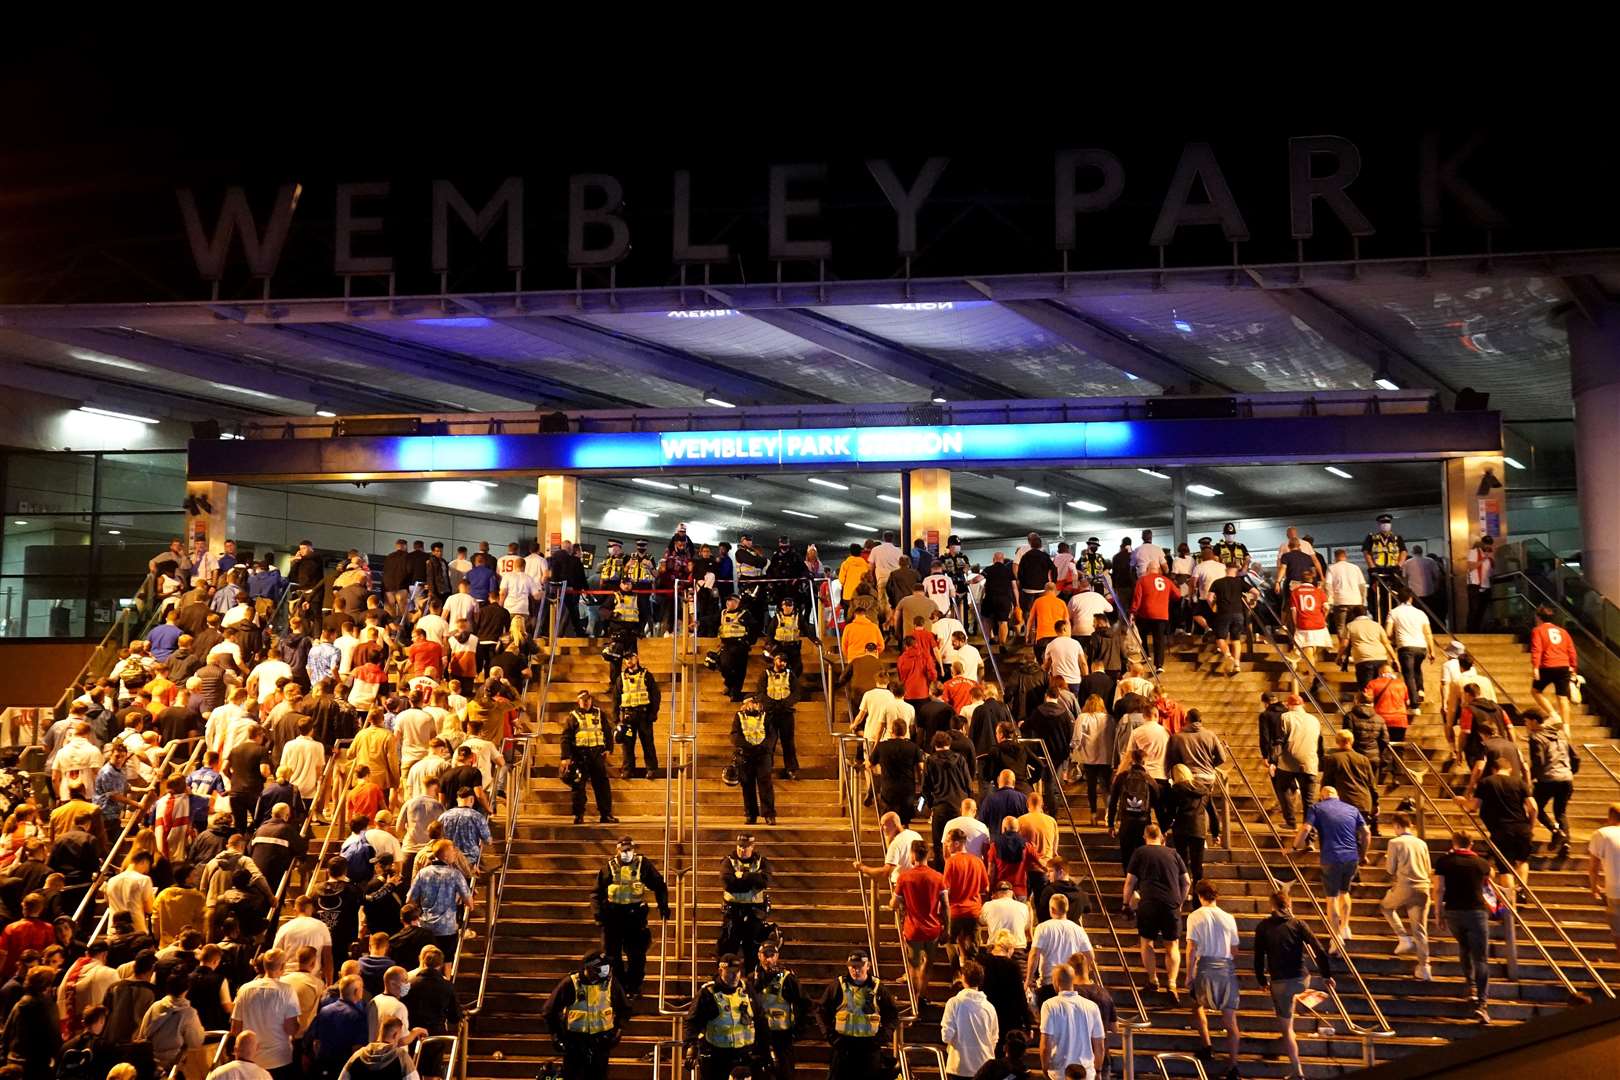 England fans outside Wembley Park station after the Uefa Euro 2020 final defeat (Zac Goodwin/PA)